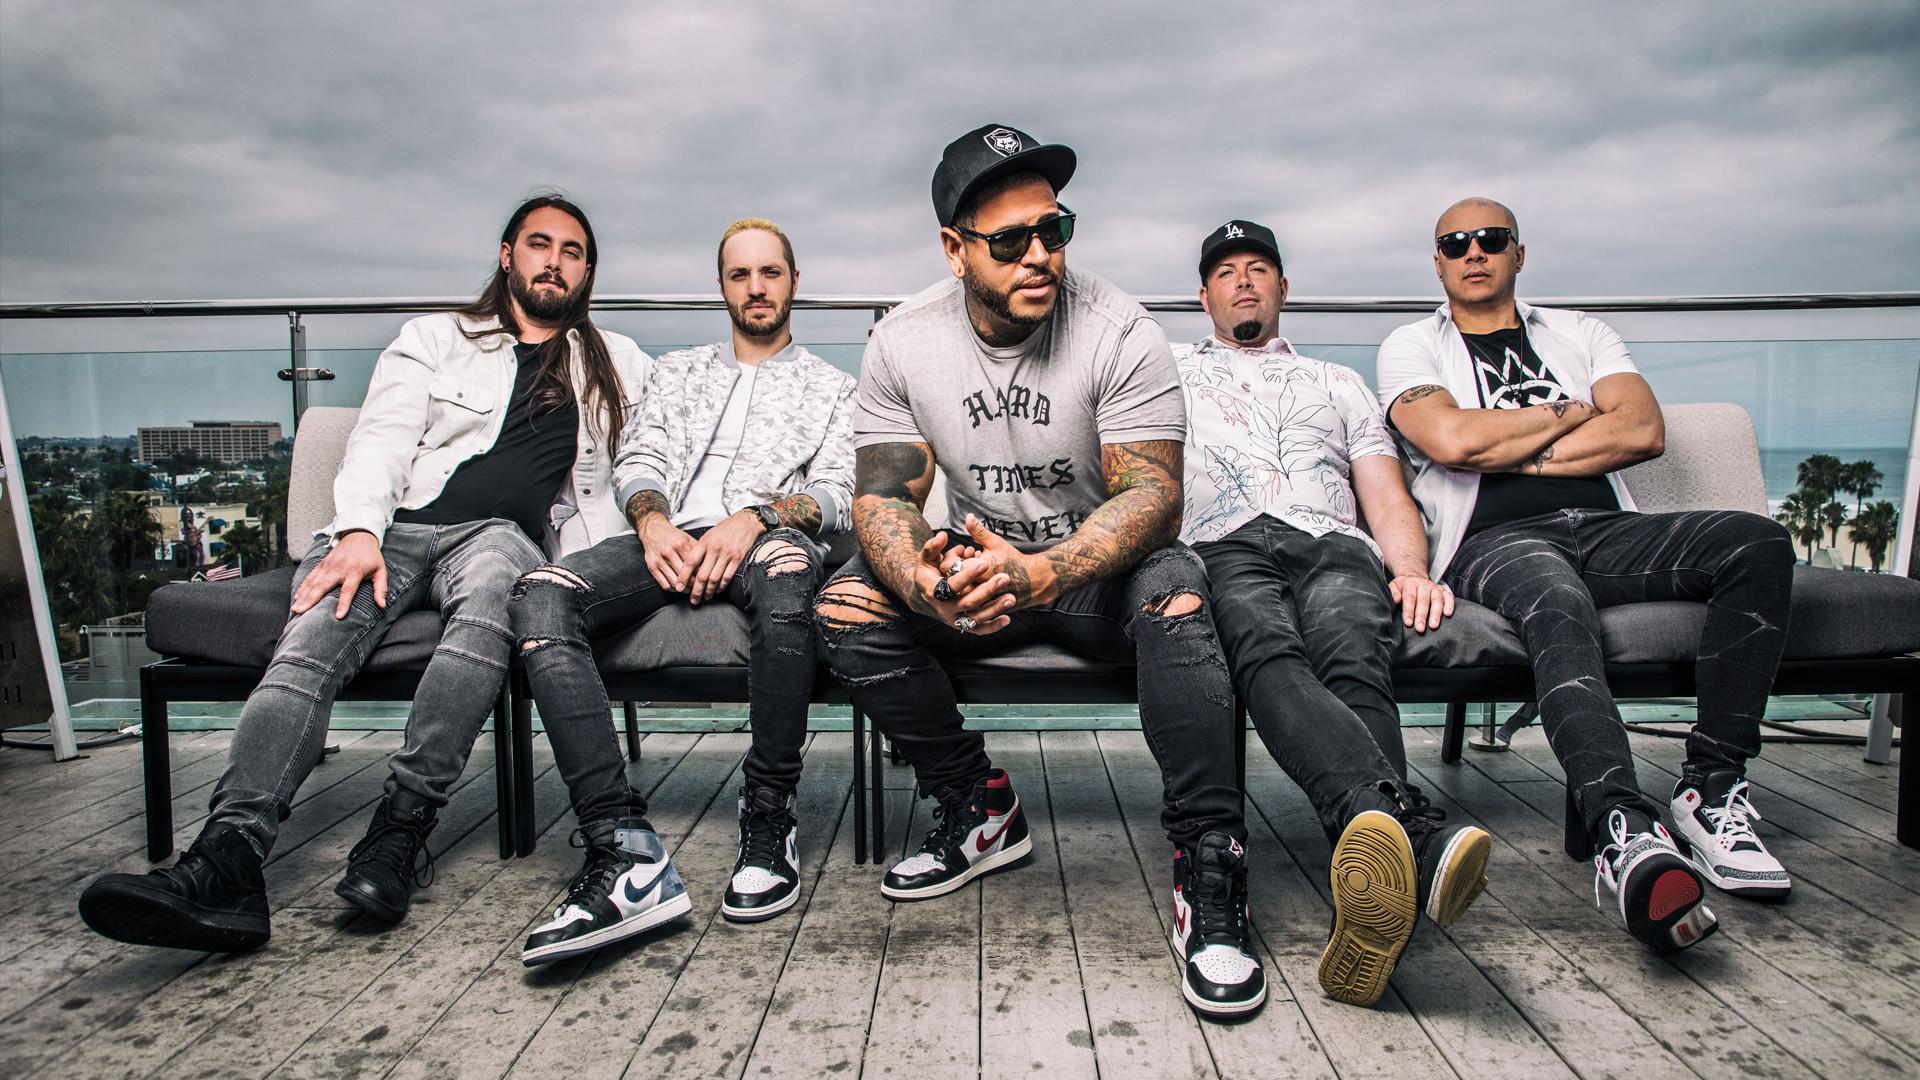 WATCH BAD WOLVES COVER LINKIN PARK’S “CRAWLING”